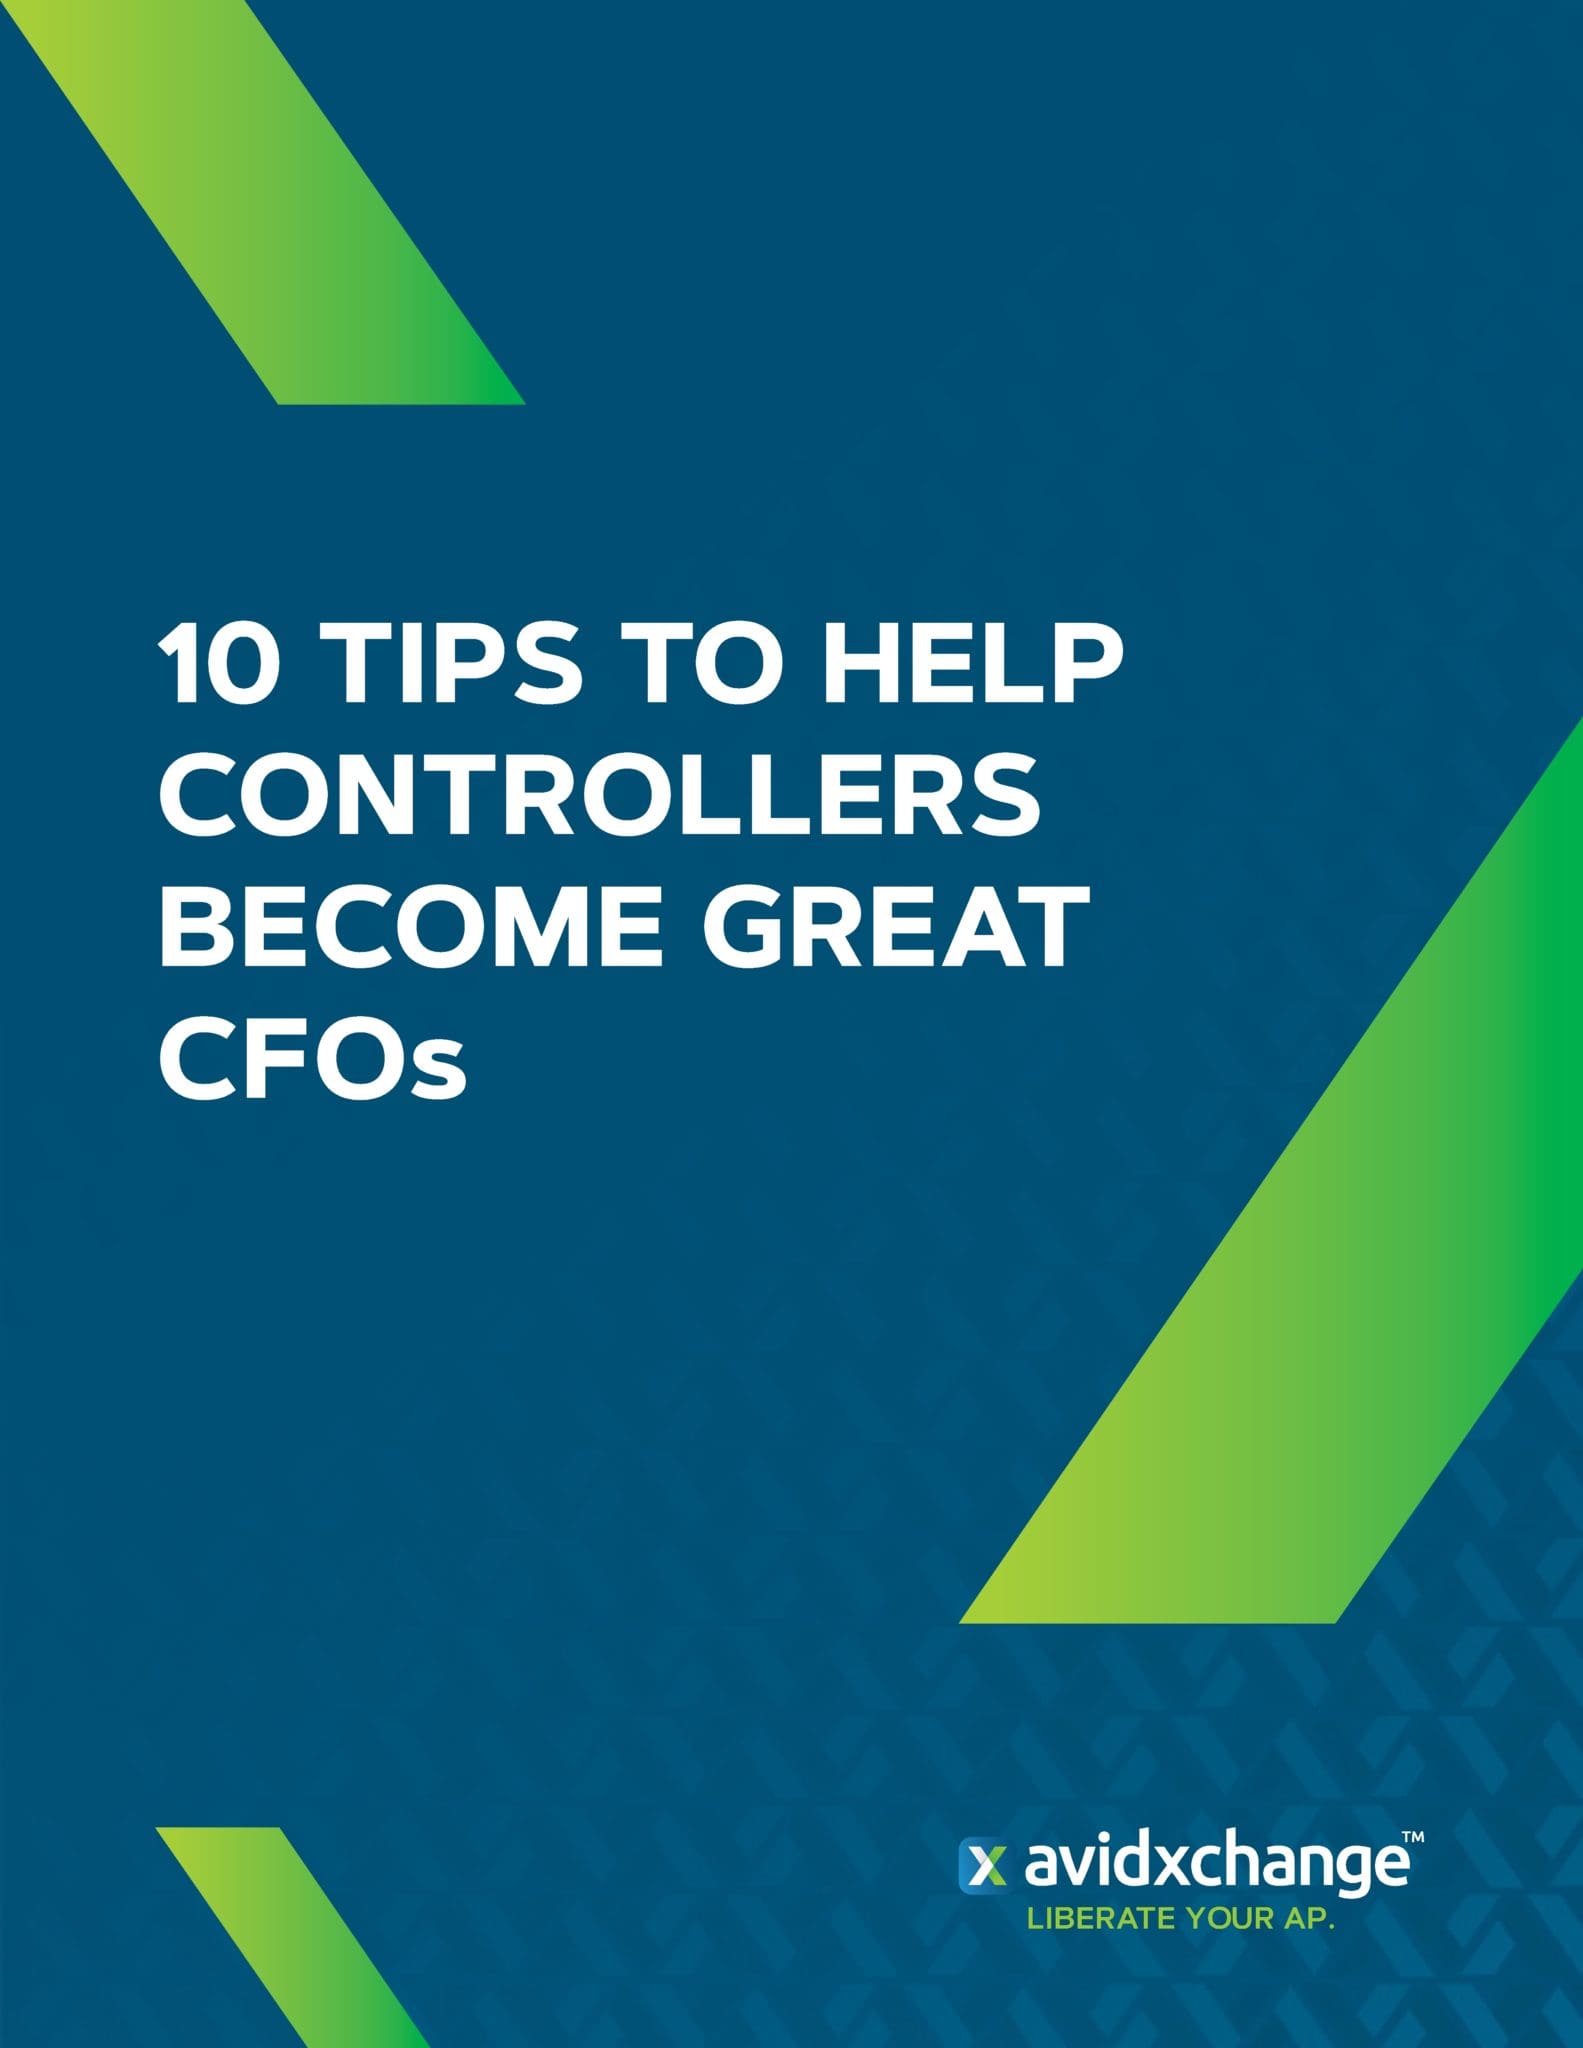 10 Tips to Help Controllers Become Great CFOs eBook cover.